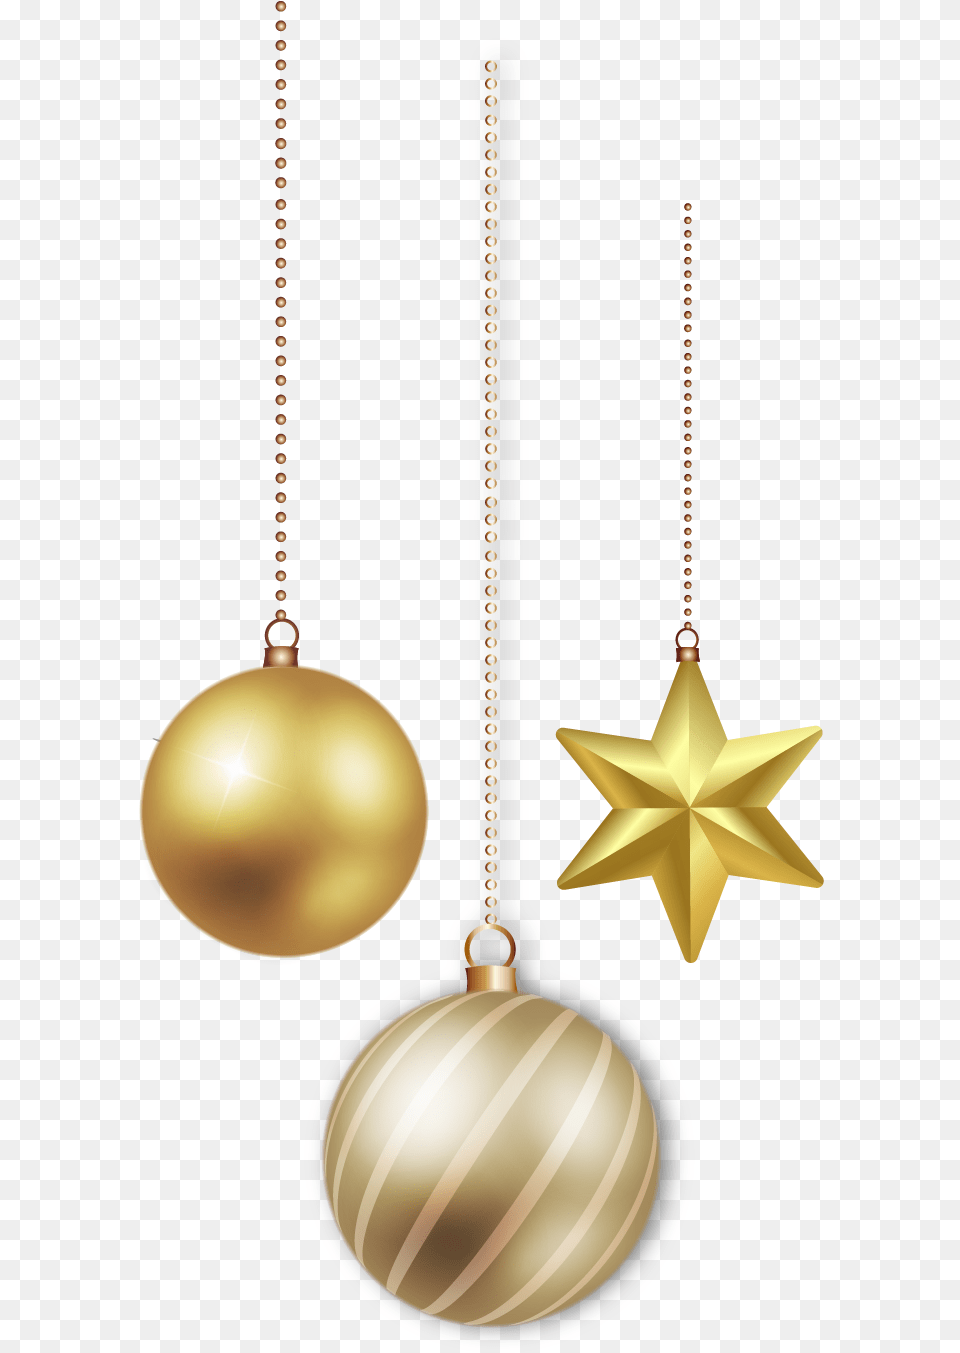 Gold Christmas Balls Ornaments Christmas Ornament Vector, Accessories, Earring, Jewelry Png Image